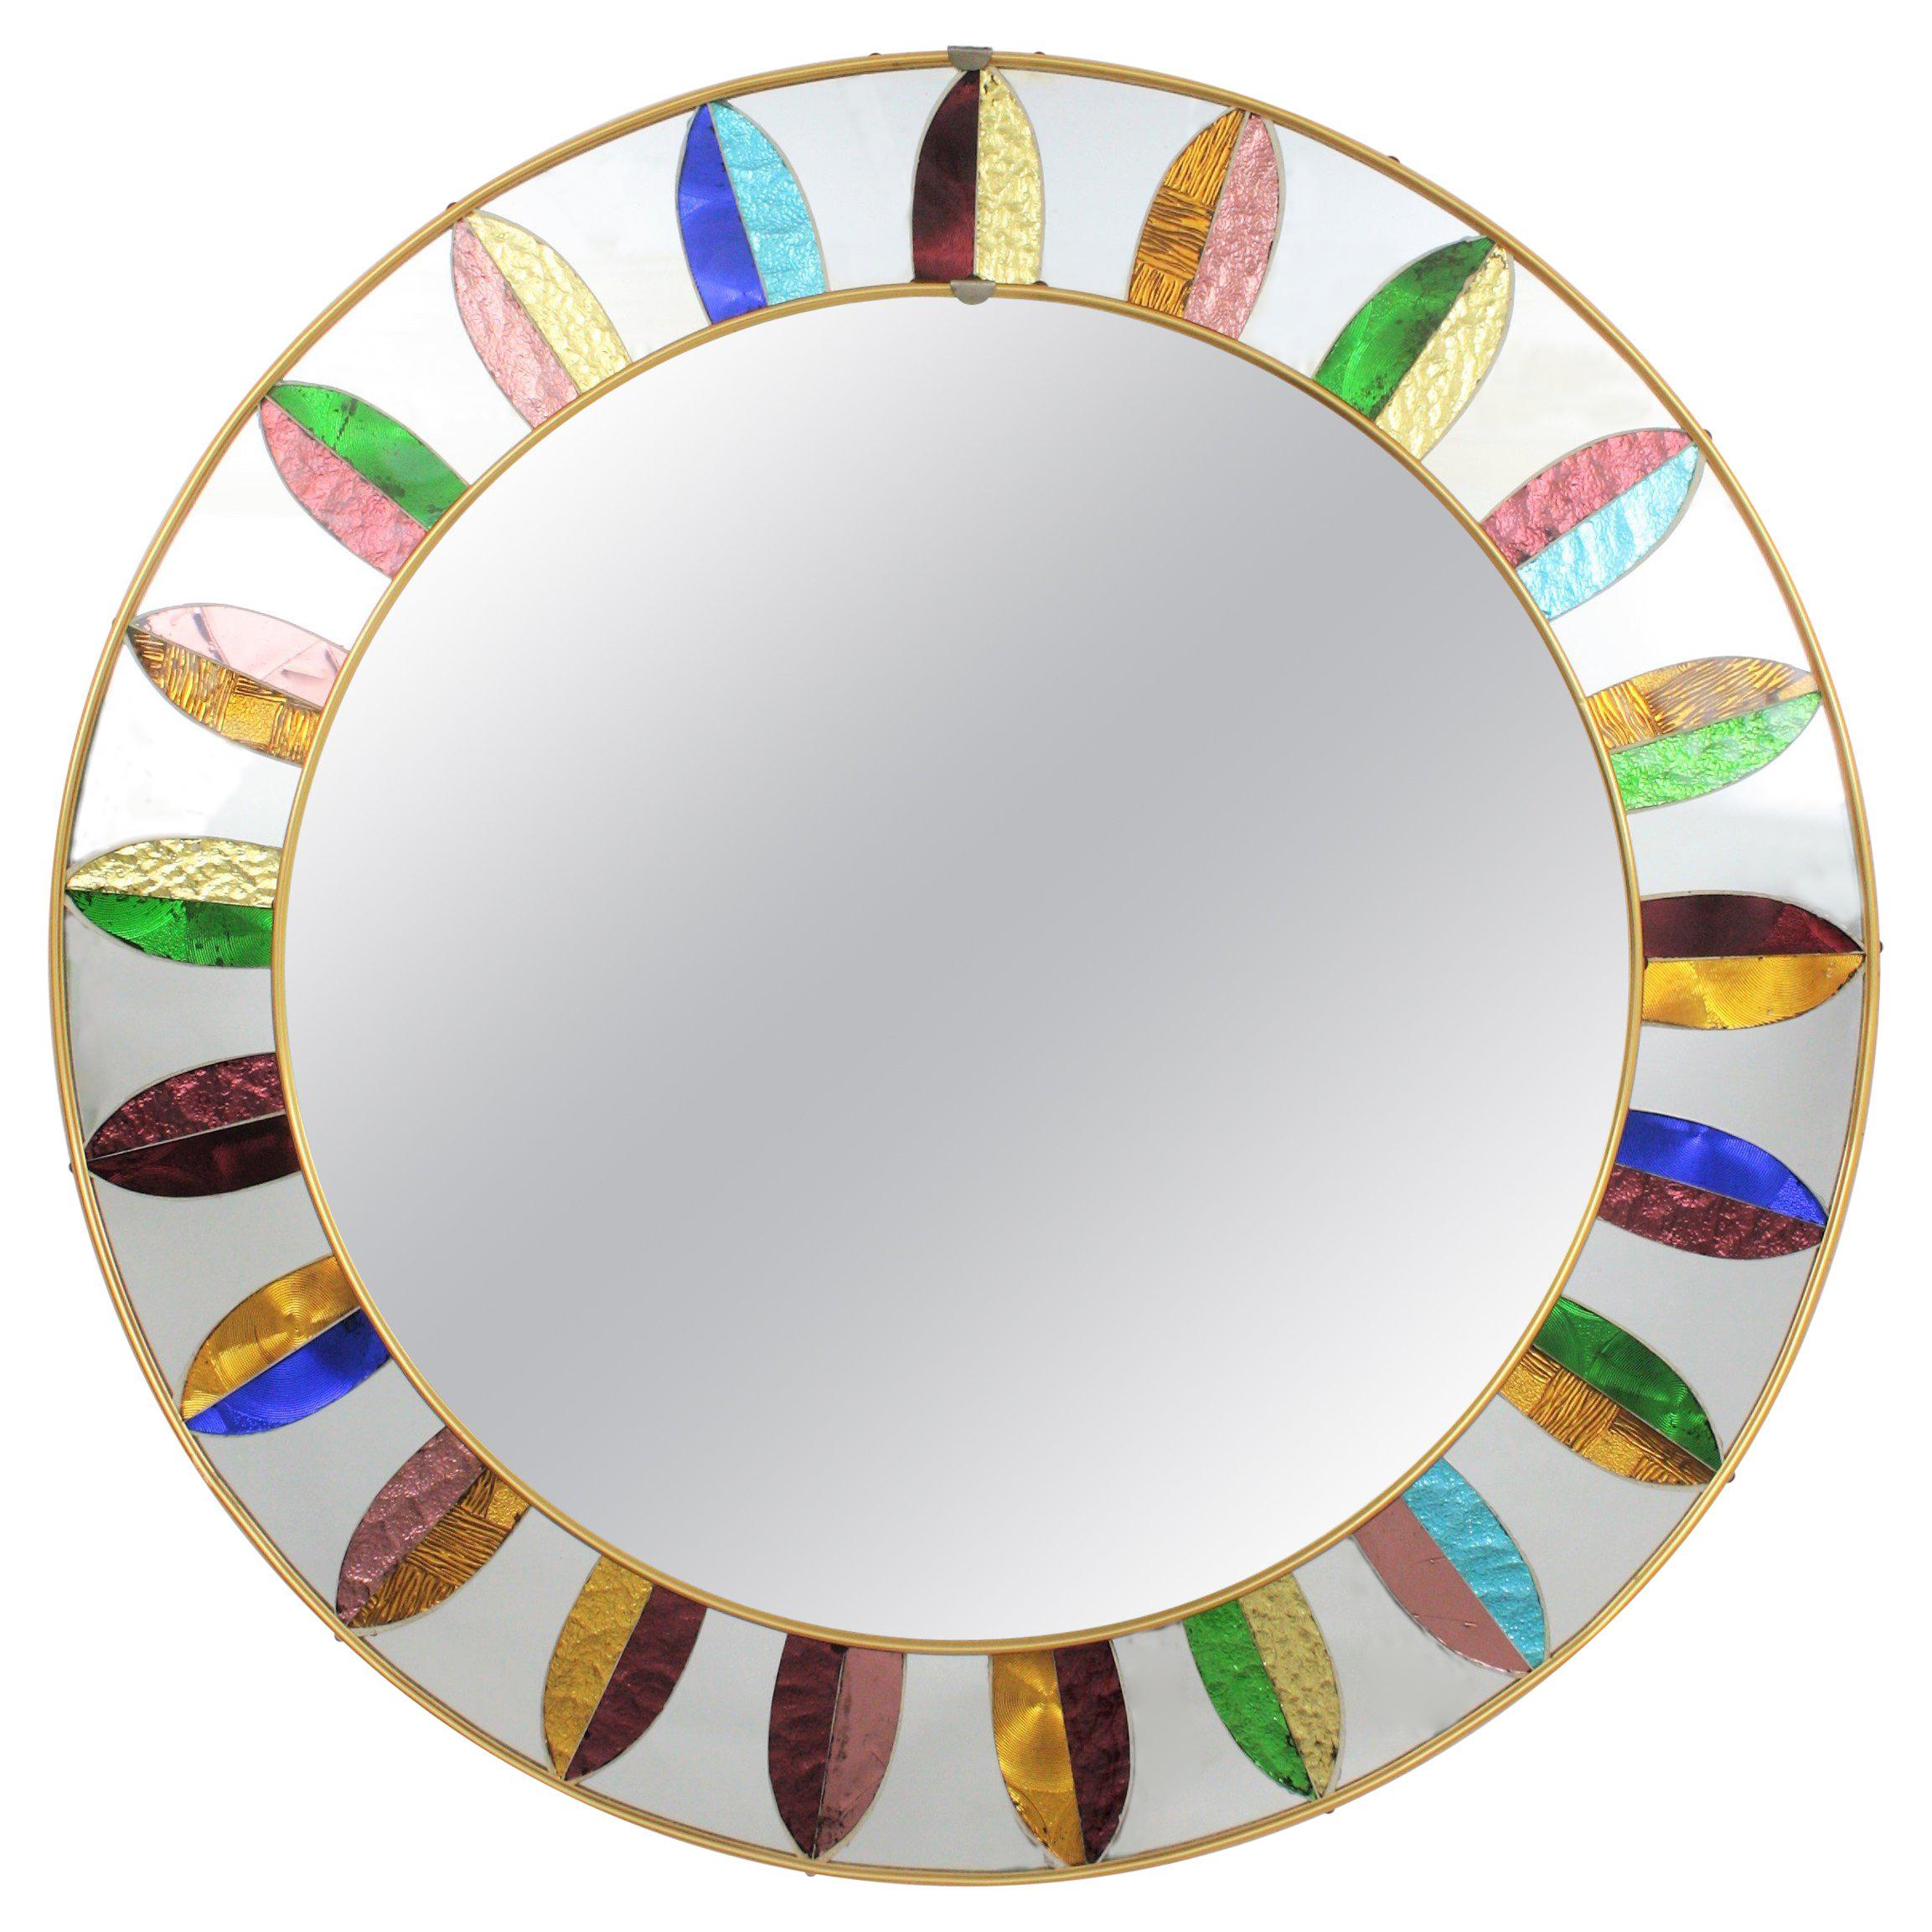 Spanish Mid-20th Century Round Mirror Framed with Multicolored Mirrored Glasses